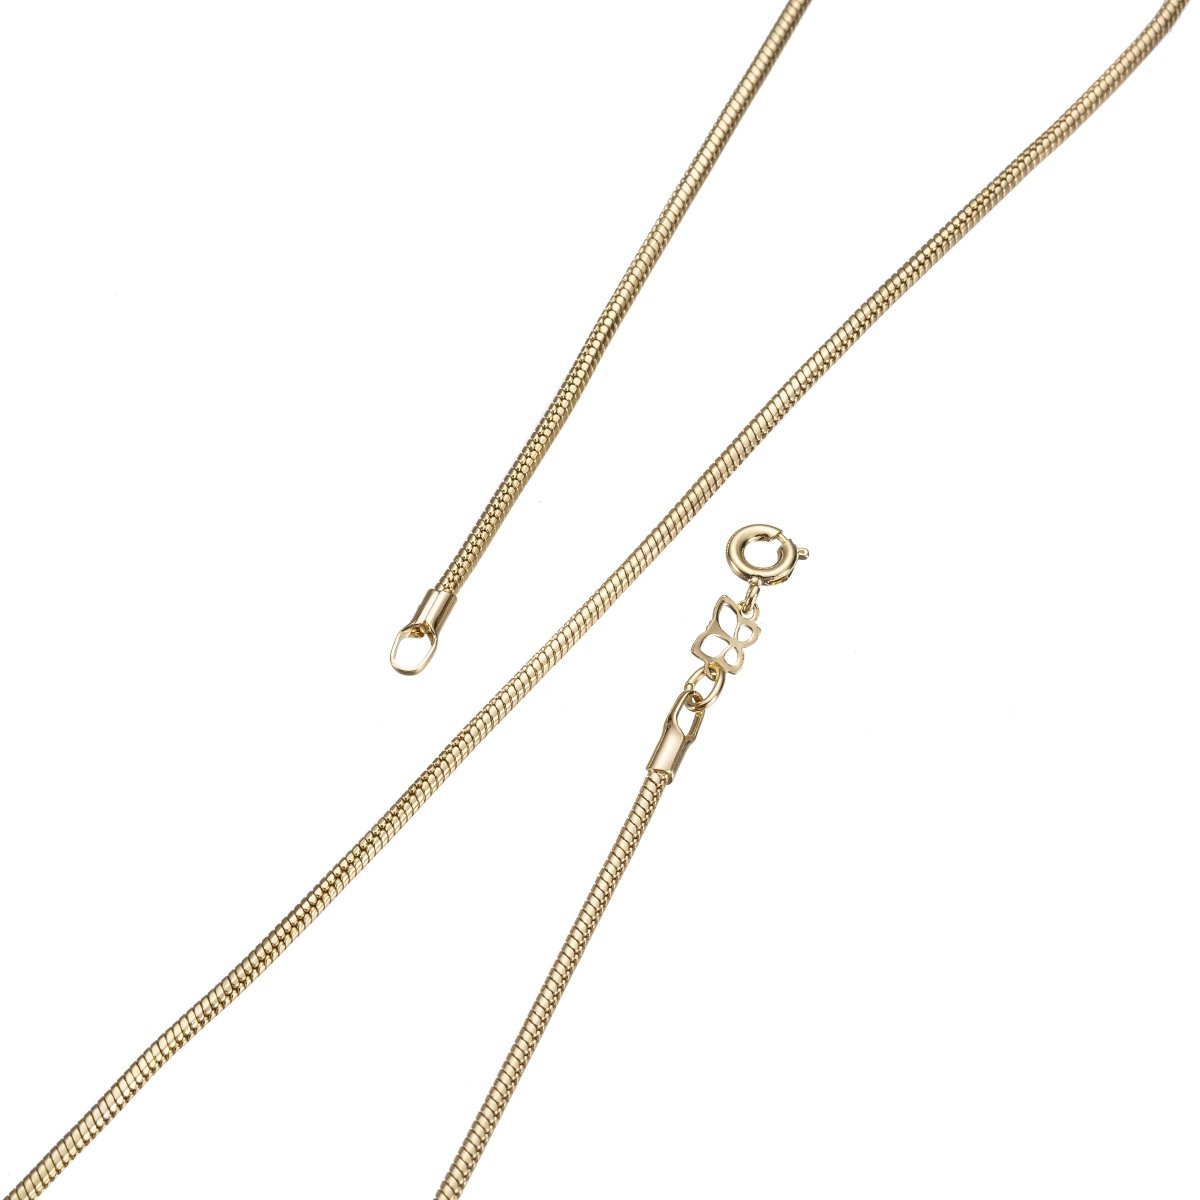 14K Gold Filled 17.5 inch Snake Chain Necklace, Omega Finished Chain Necklace, Dainty 1.4mm Omega Necklace w/Spring Ring | CN-247 Overstock Clearance Pricing - DLUXCA